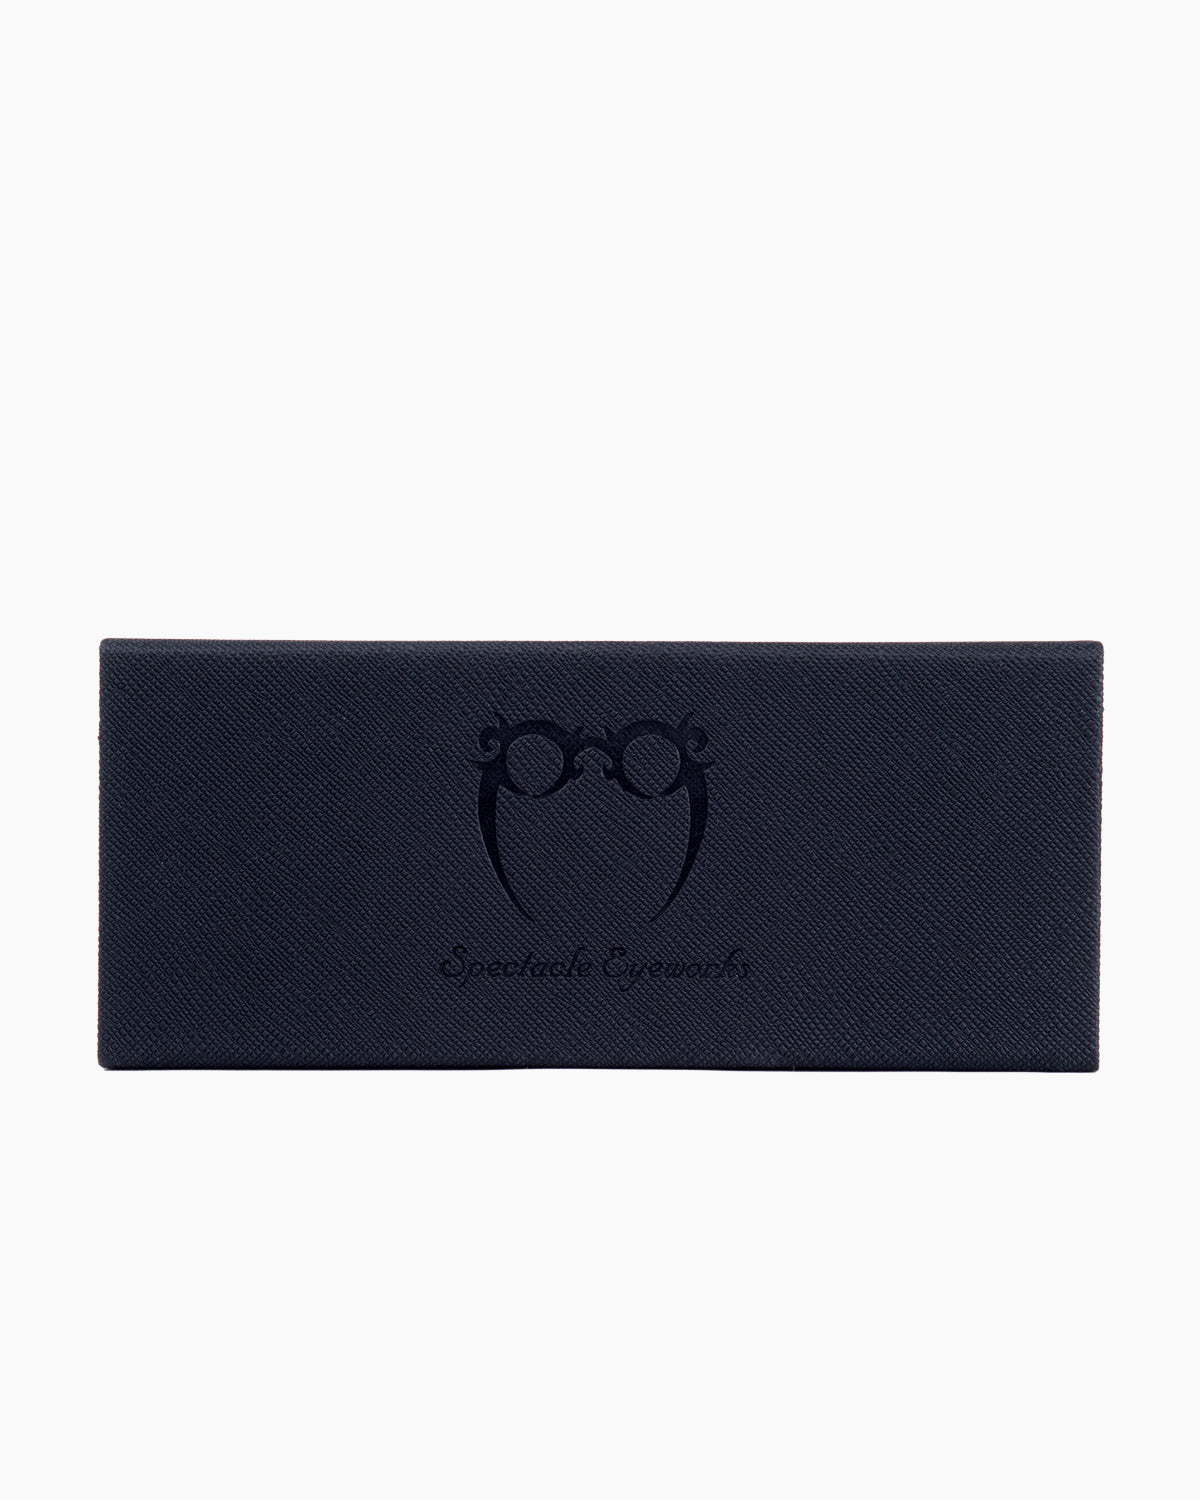 Spectacleeyeworks - Riley - c716 | Bar à lunettes:  Marie-Sophie Dion